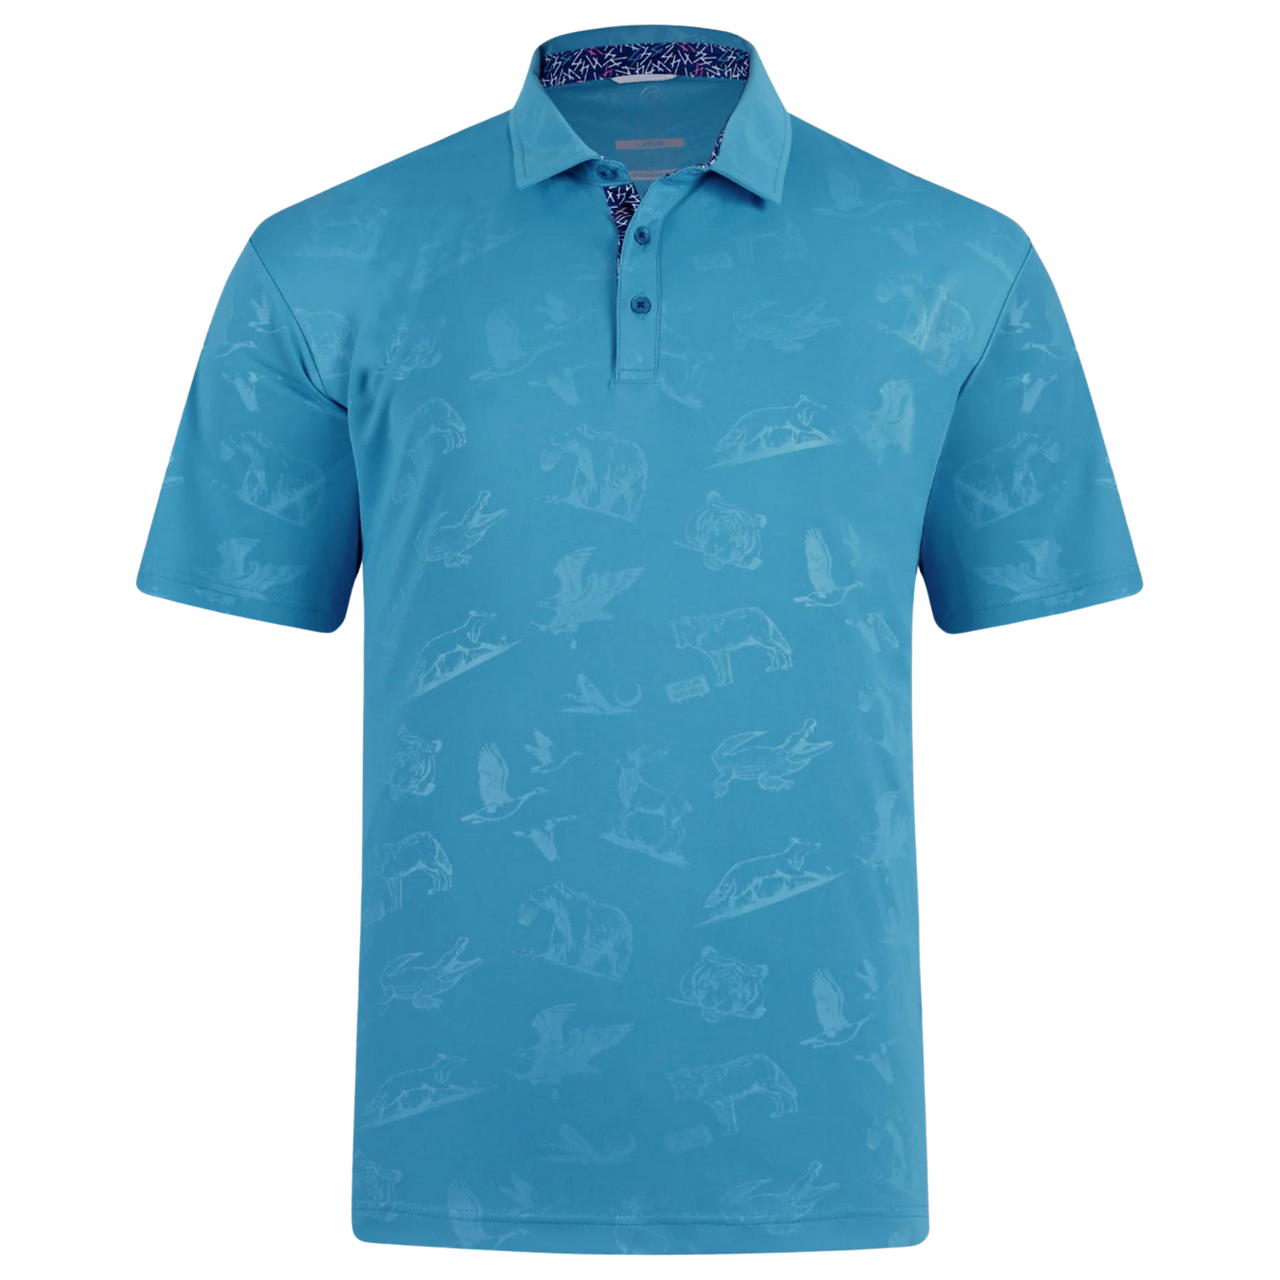 Swannies Forbes Men's Polo